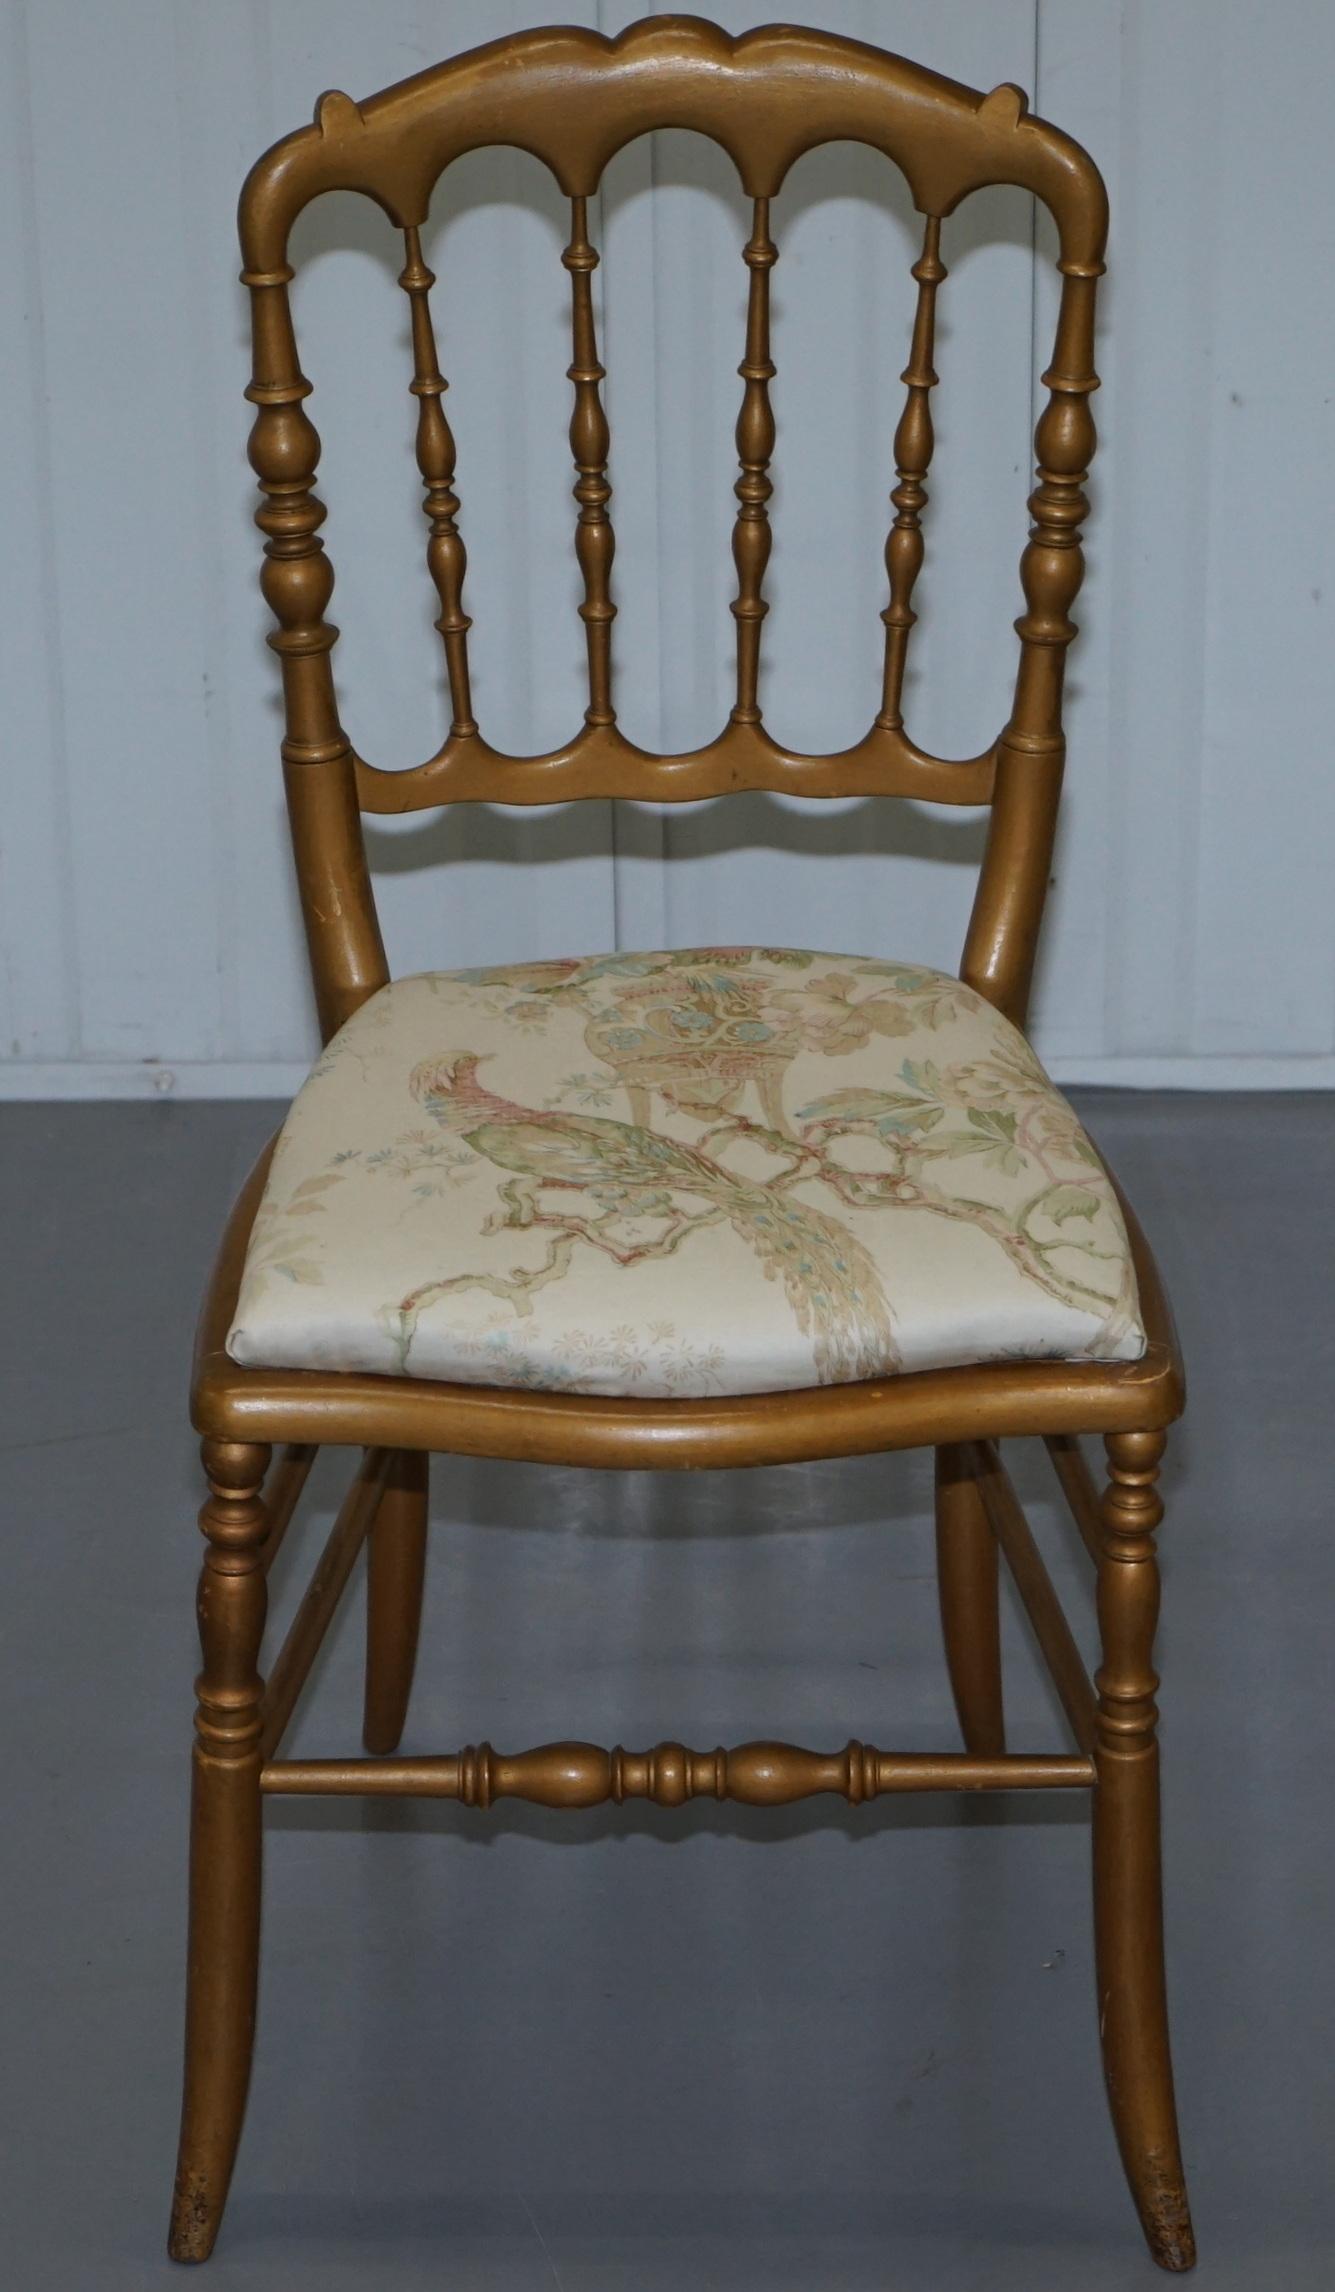 We are delighted to offer for sale this lovely circa 1900 Regency style gold gilt wood framed chair with ornate bird upholstery

A good looking well made and decorative antique chair, the upholstery really is lovely it depicts a gorgeous bird. It